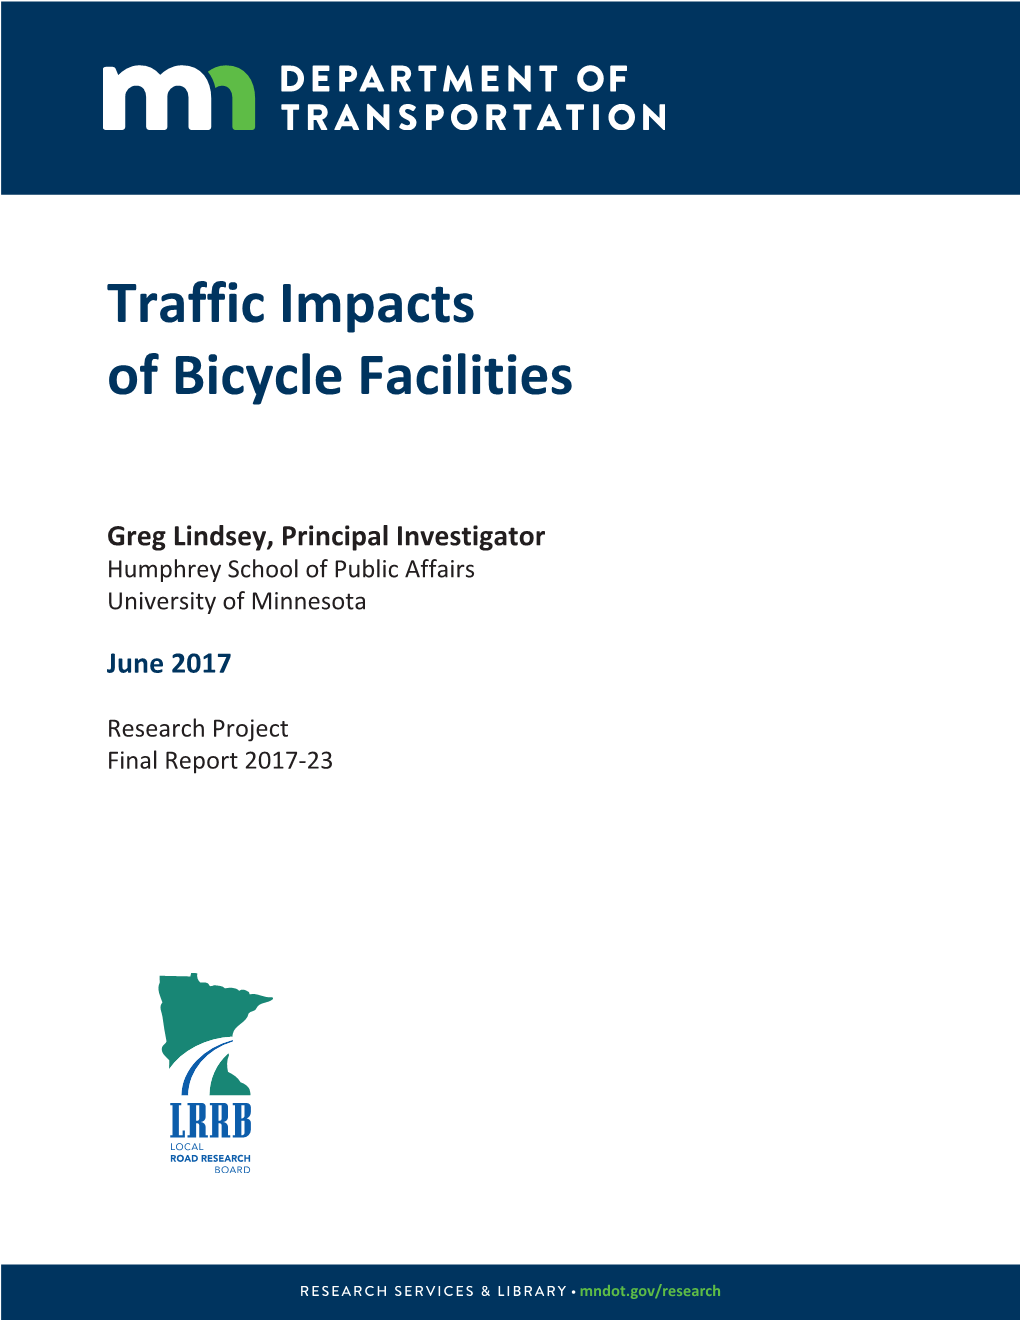 Traffic Impacts of Bicycle Facilities